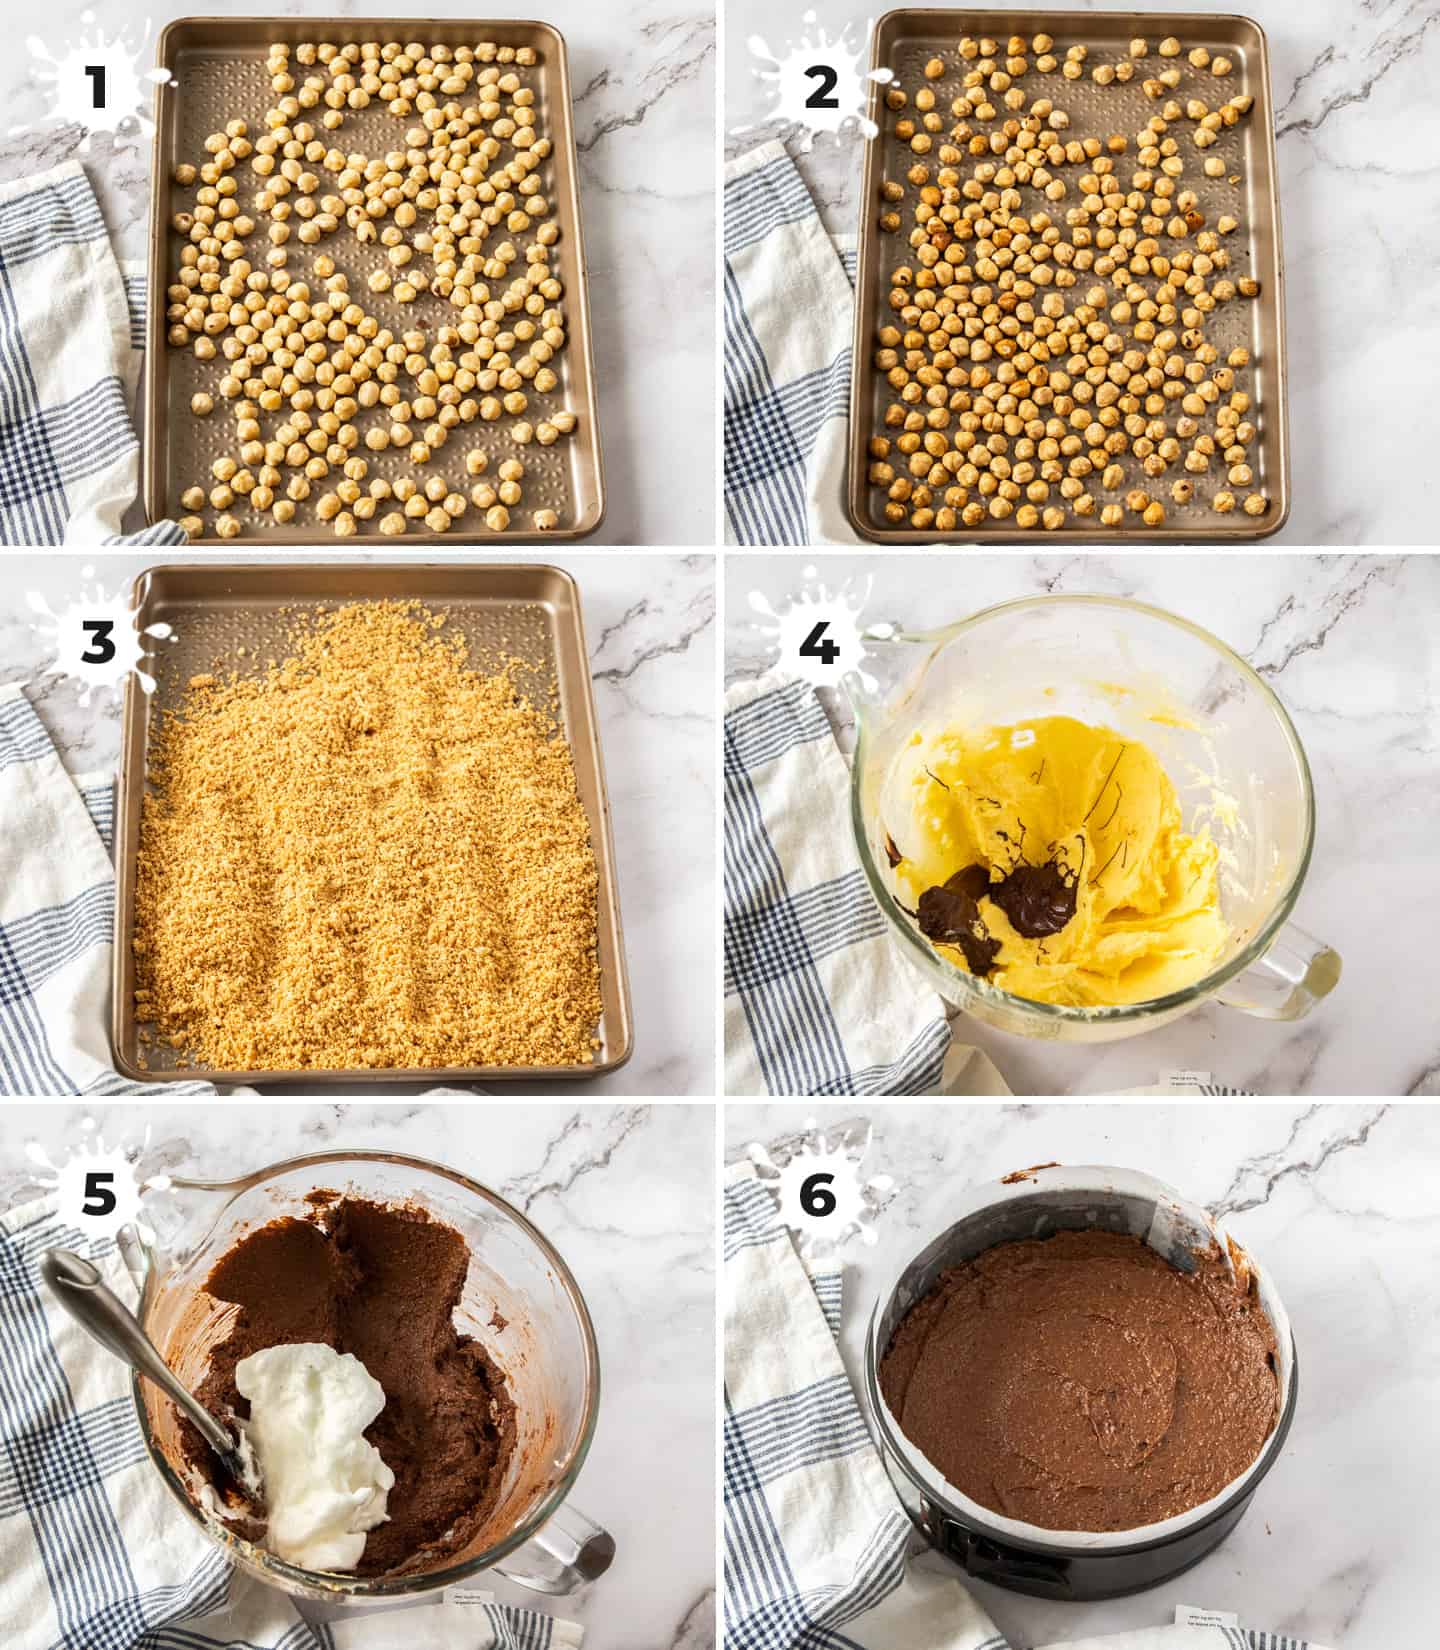 6 images in a collage showing the steps to making flourless chocolate cake.